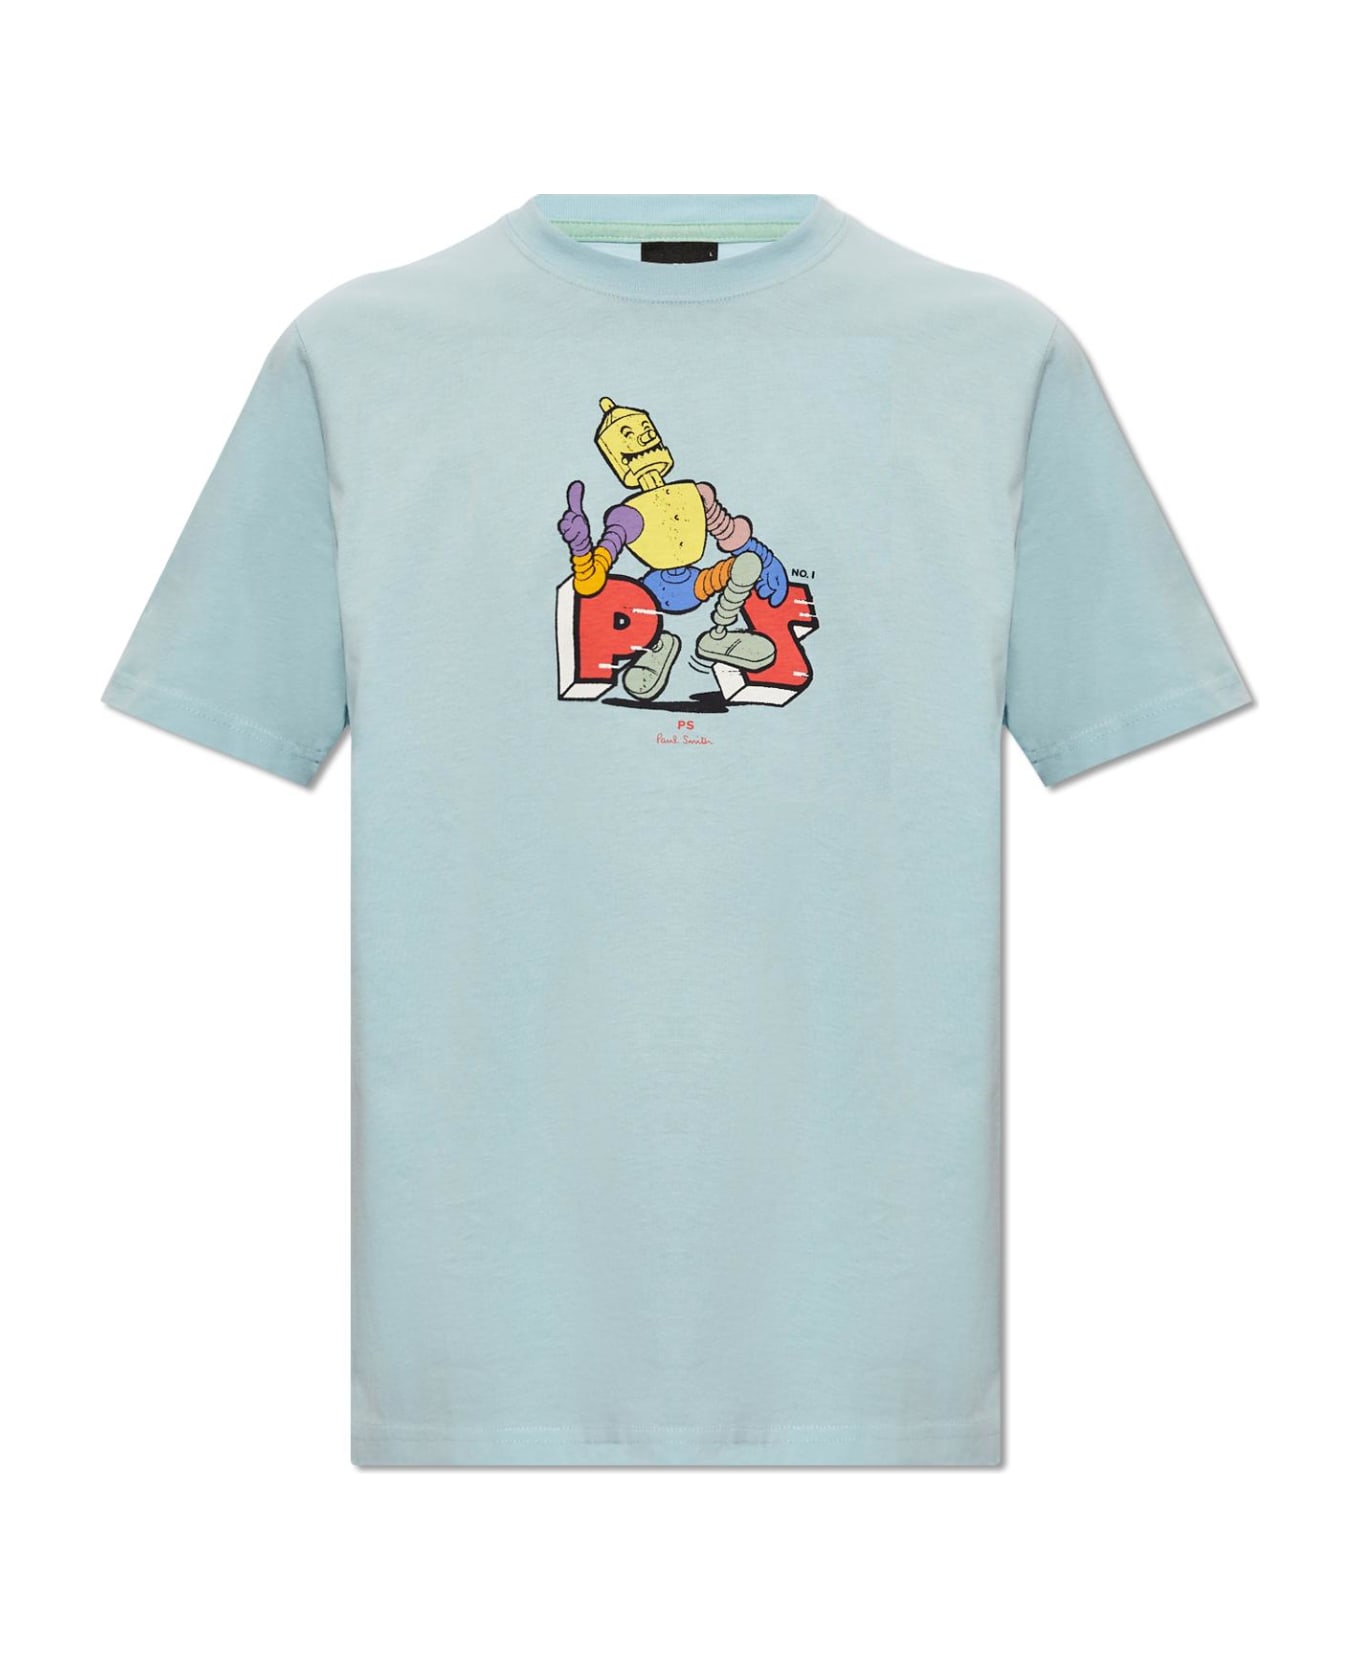 Paul Smith Ps Paul Smith Printed T-shirt - Clear Blue